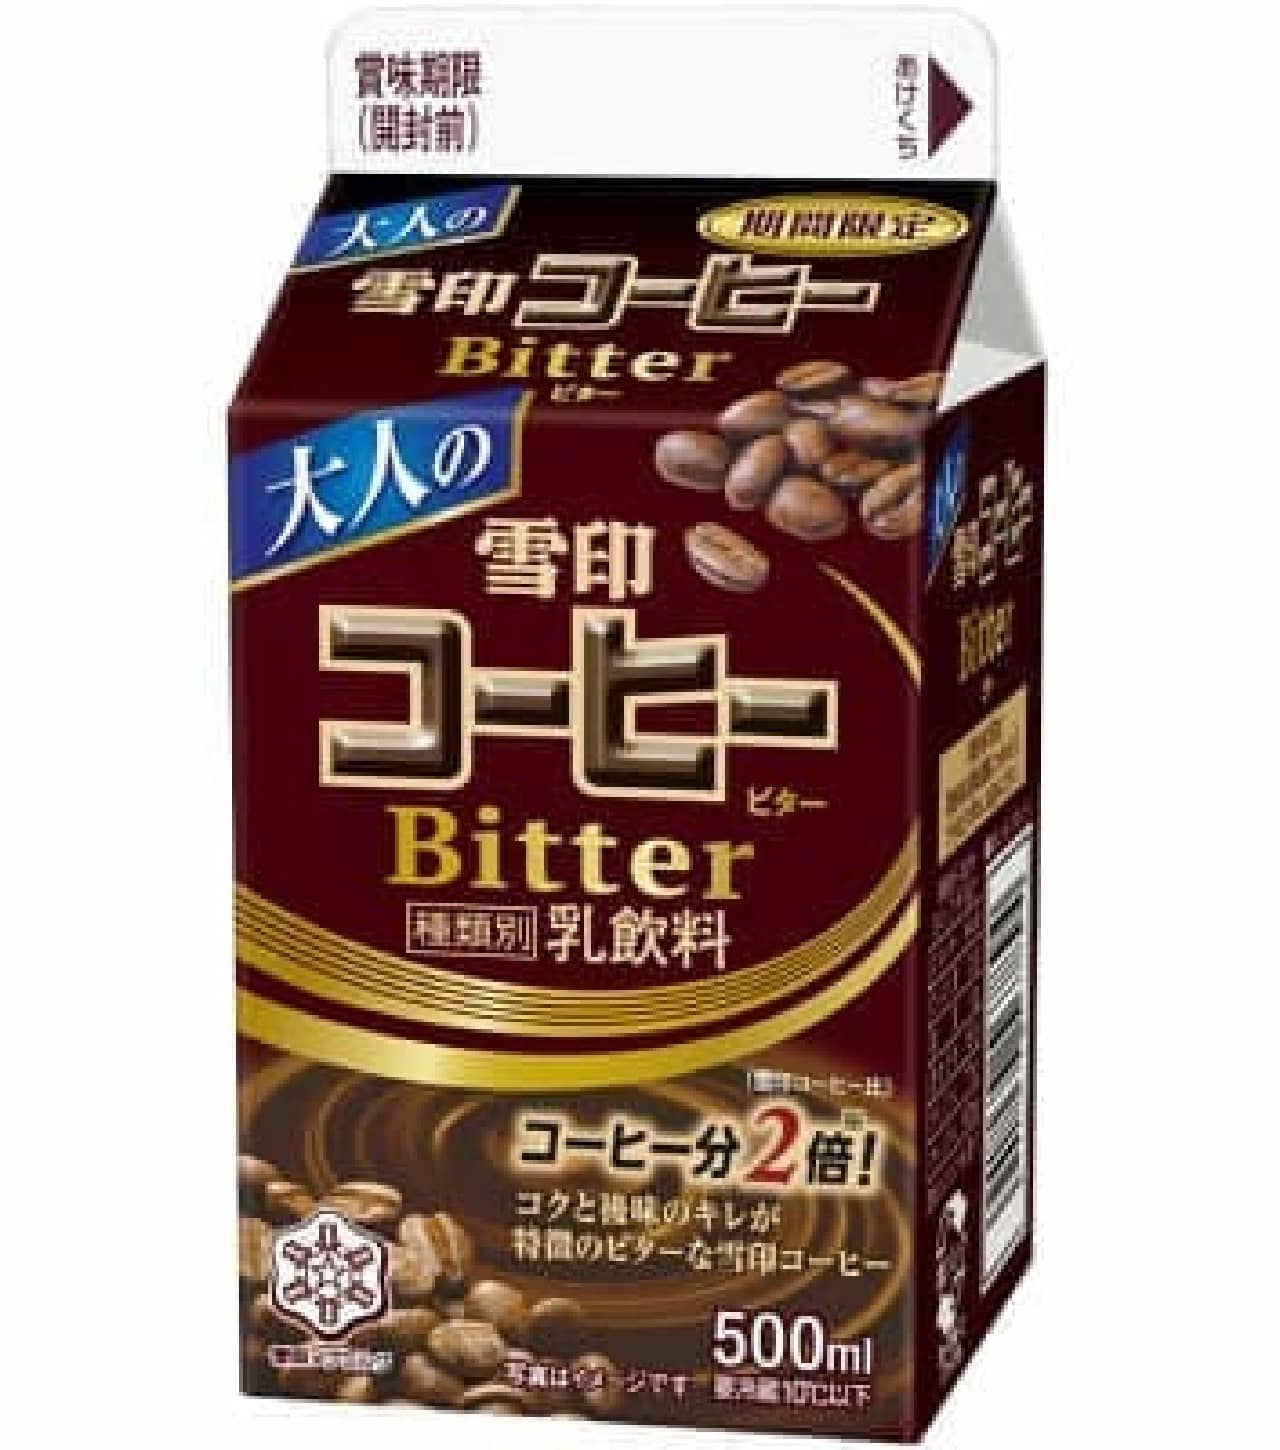 Bitter coffee milk for adults!